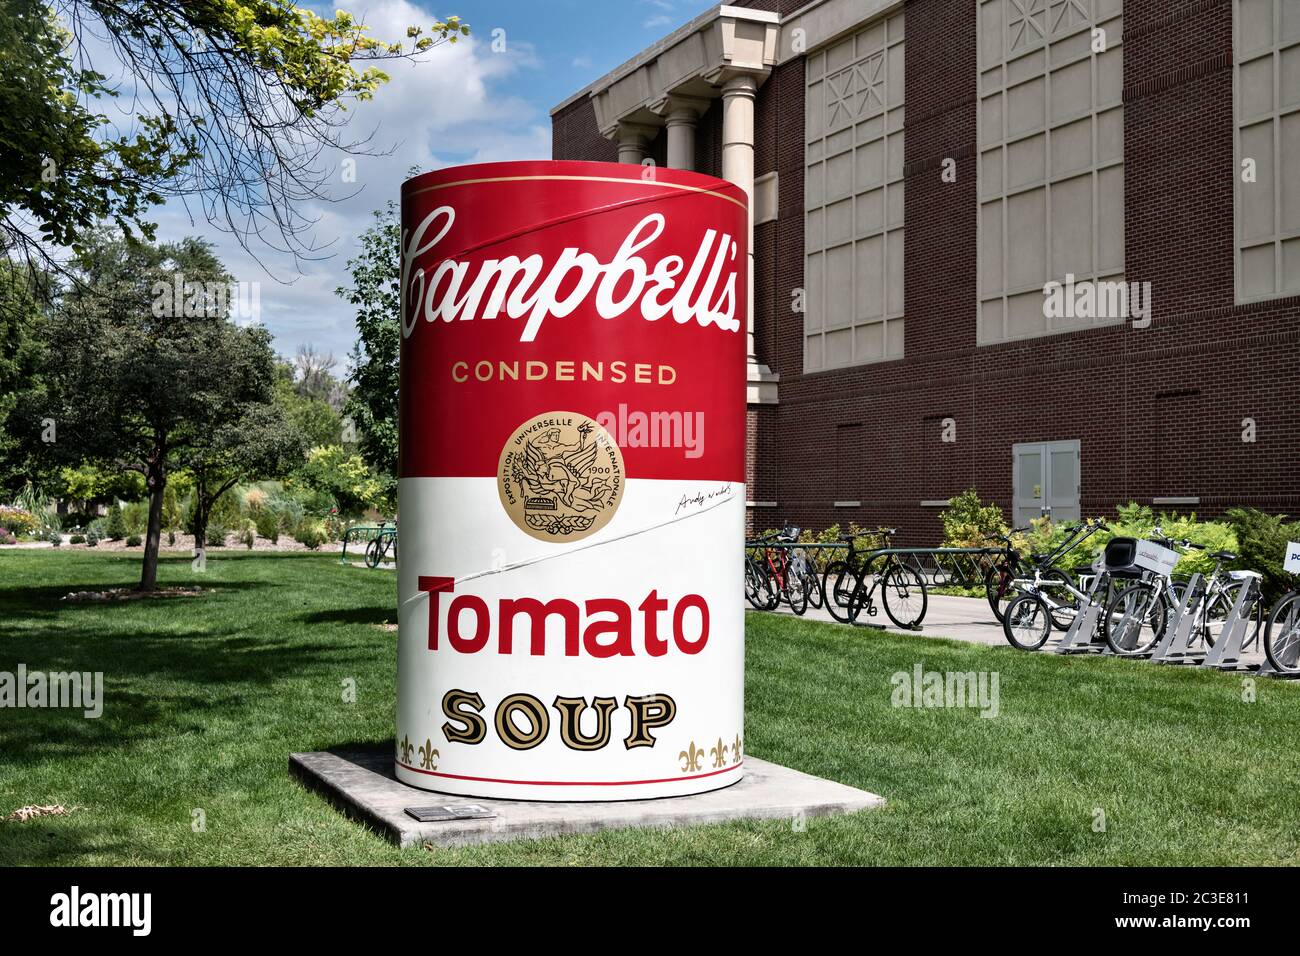 A giant Campbell Tomato Soup can sculpture by Andy Warhol on display at Colorado State University in Fort Collins, Colorado. Stock Photo